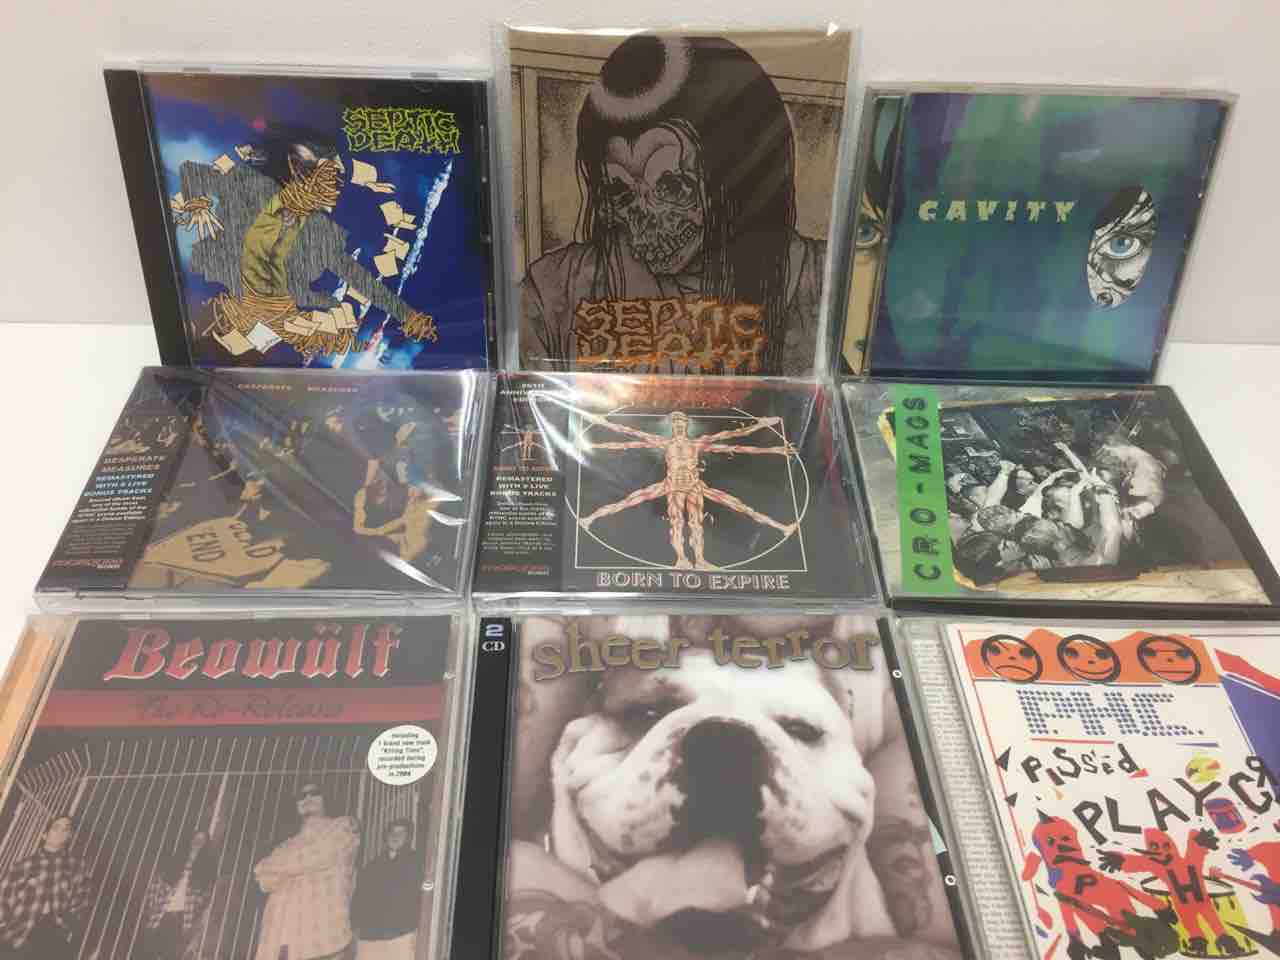 CROSSED OUT,NO COMMENT,SEPTIC DEATH,STIKKYなど 良質パンク